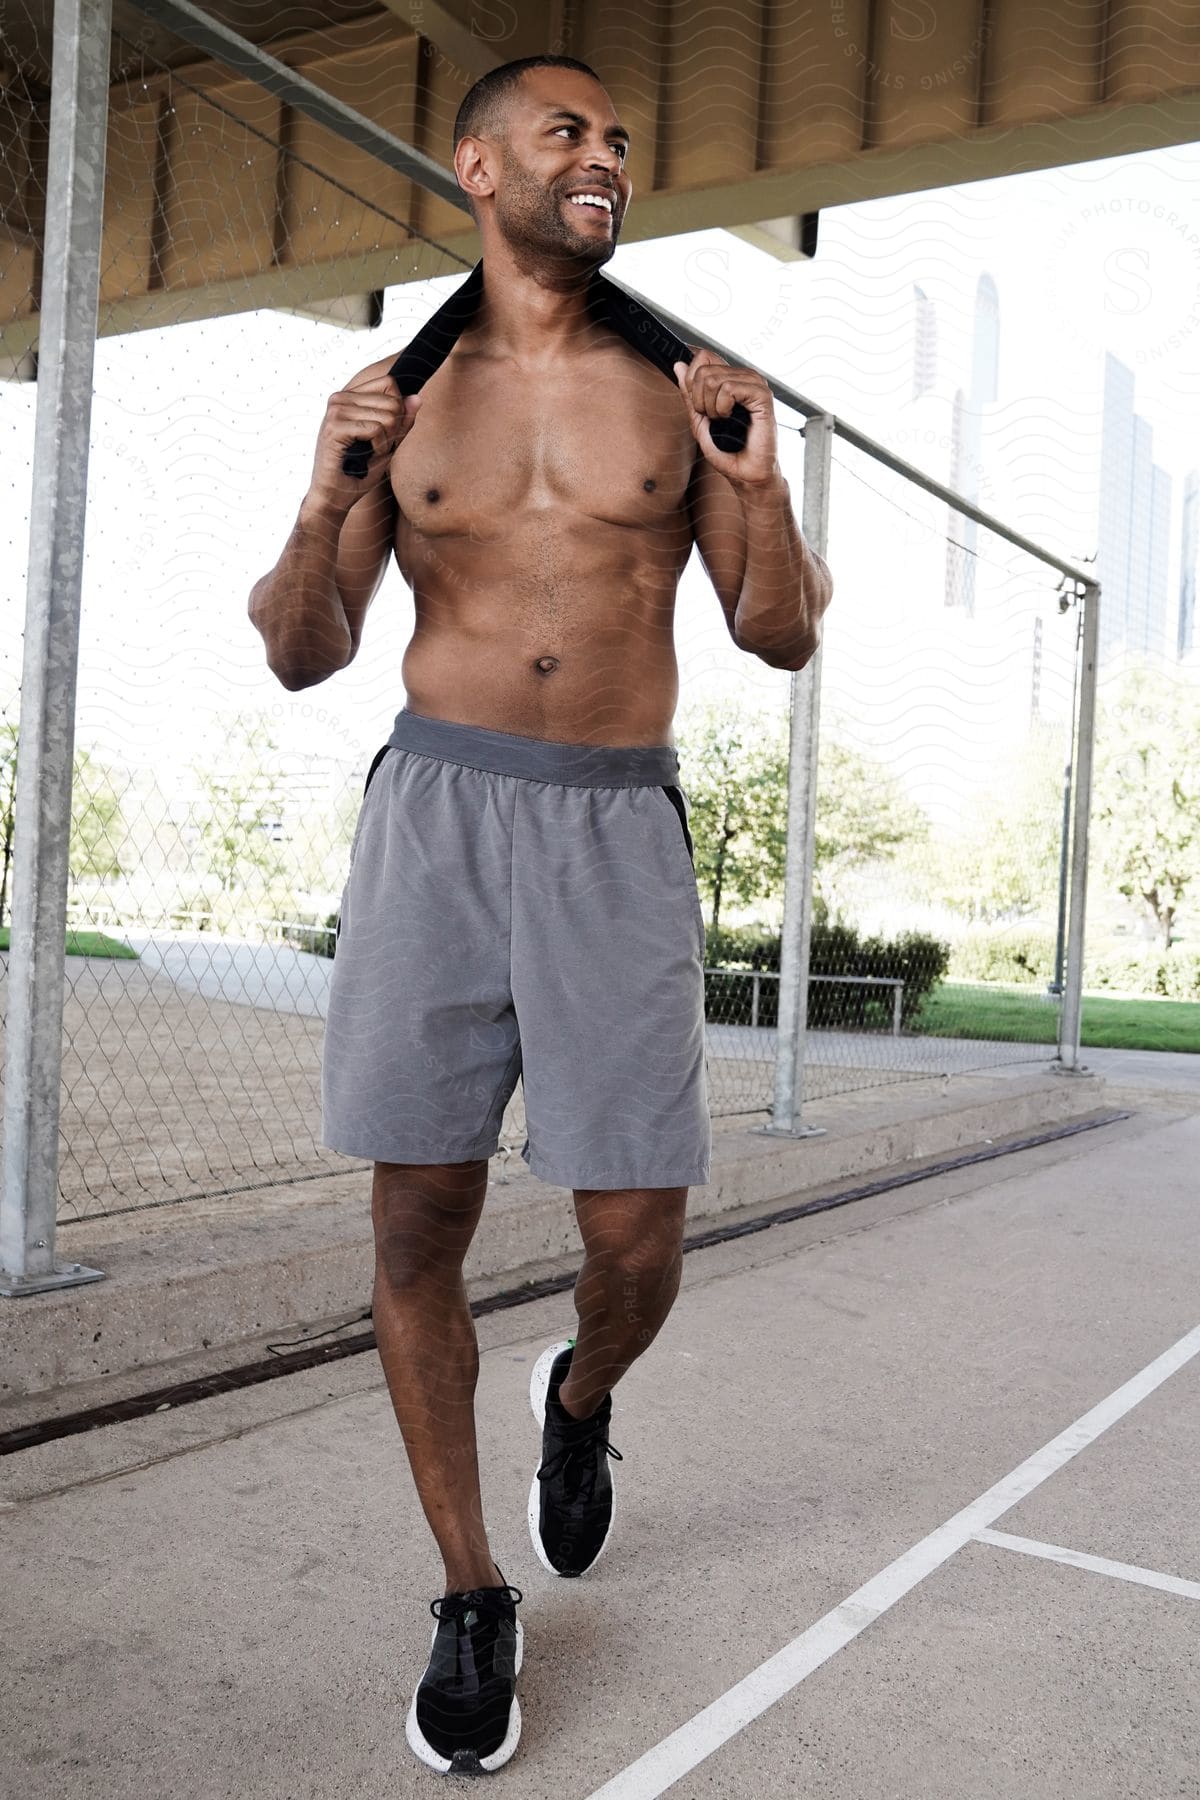 A muscled man in shorts and no shirt walks into a sports area smiling.